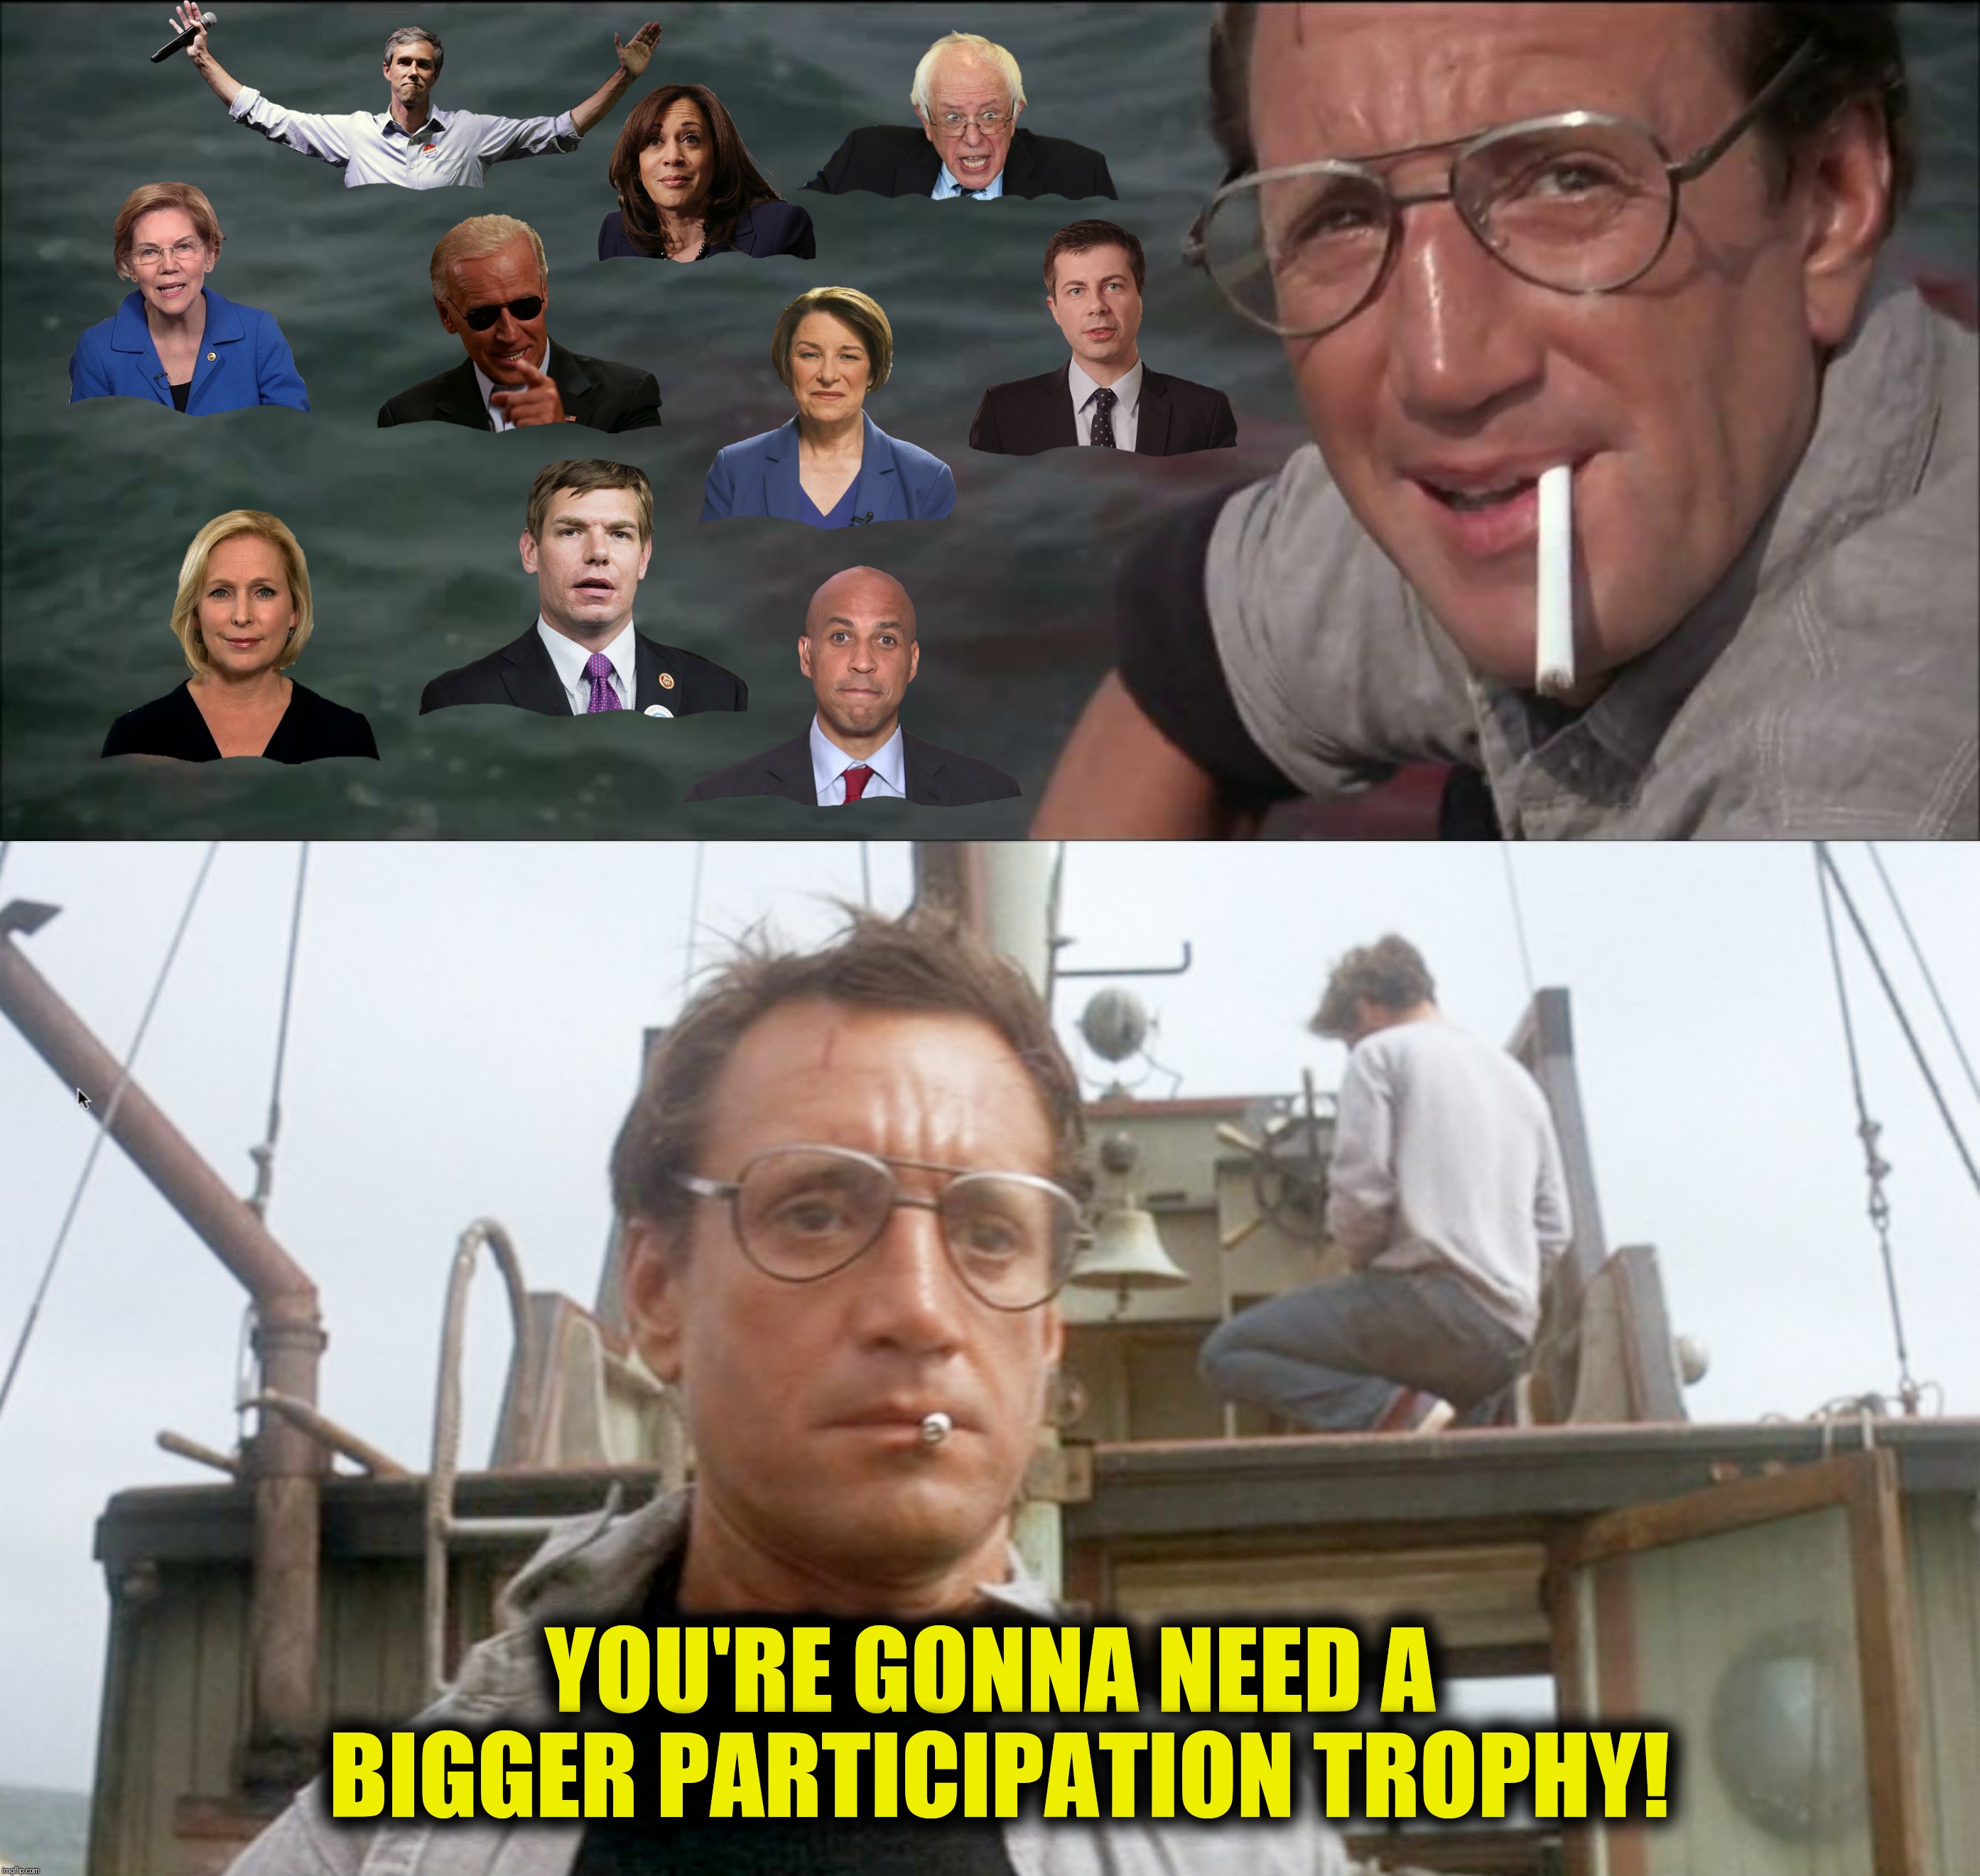 The face you make when you realize that's only half of them | YOU'RE GONNA NEED A BIGGER PARTICIPATION TROPHY! | image tagged in jaws,2020 presidential candidates,participation trophy,you're gonna need a bigger boat,bad photoshop | made w/ Imgflip meme maker